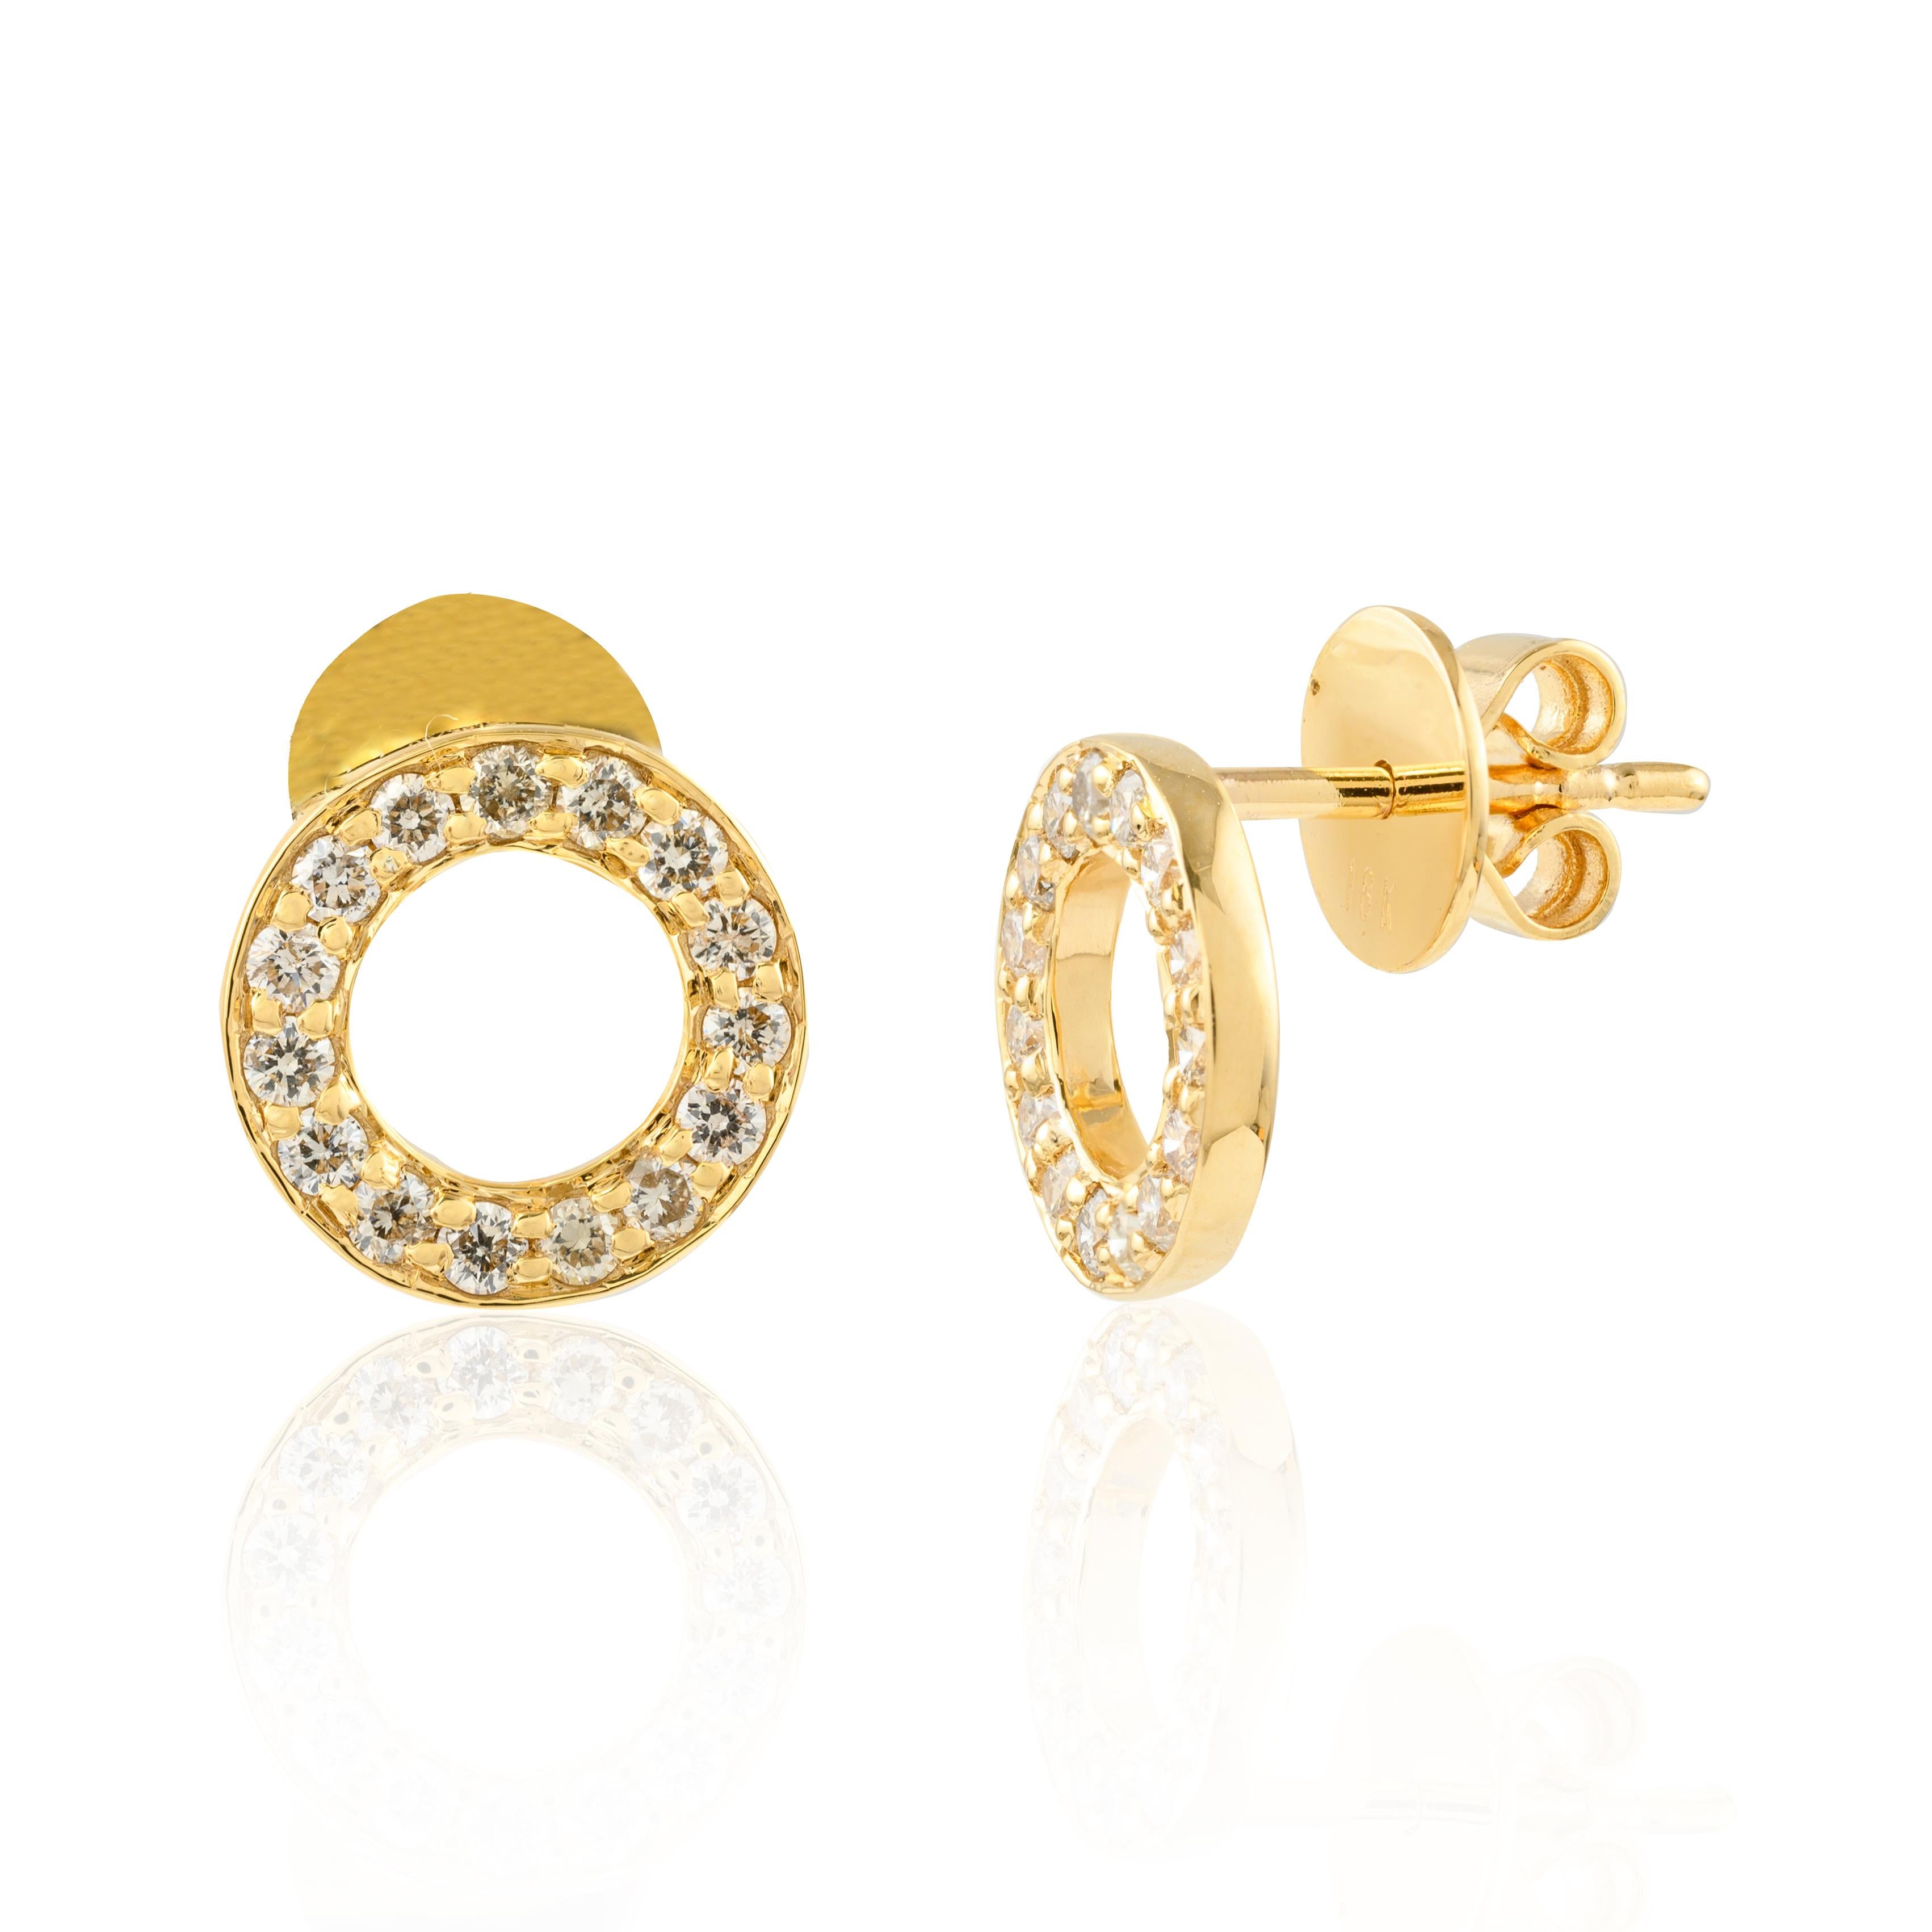 Minimalist Diamond Circle Stud Earrings Gift For Her in 18k Solid Yellow Gold In New Condition For Sale In Houston, TX